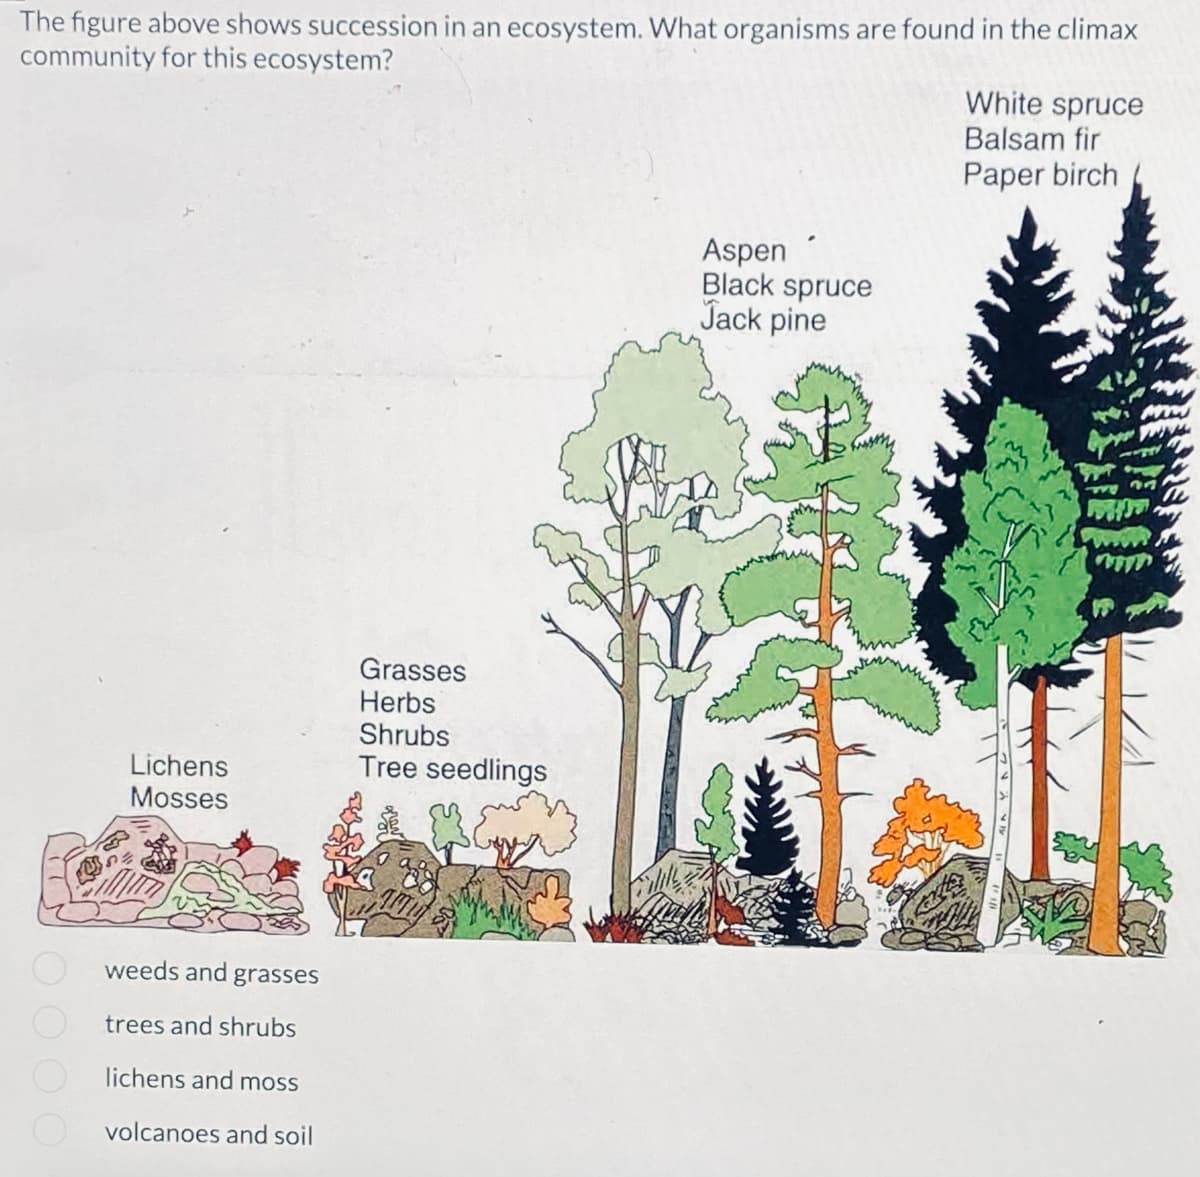 The figure above shows succession in an ecosystem. What organisms are found in the climax
community for this ecosystem?
White spruce
Balsam fir
Paper birch
Aspen
Black spruce
Jack pine
Grasses
Herbs
Shrubs
Tree seedlings
O O O O
Lichens
Mosses
weeds and grasses
trees and shrubs
lichens
and moss
volcanoes and soil